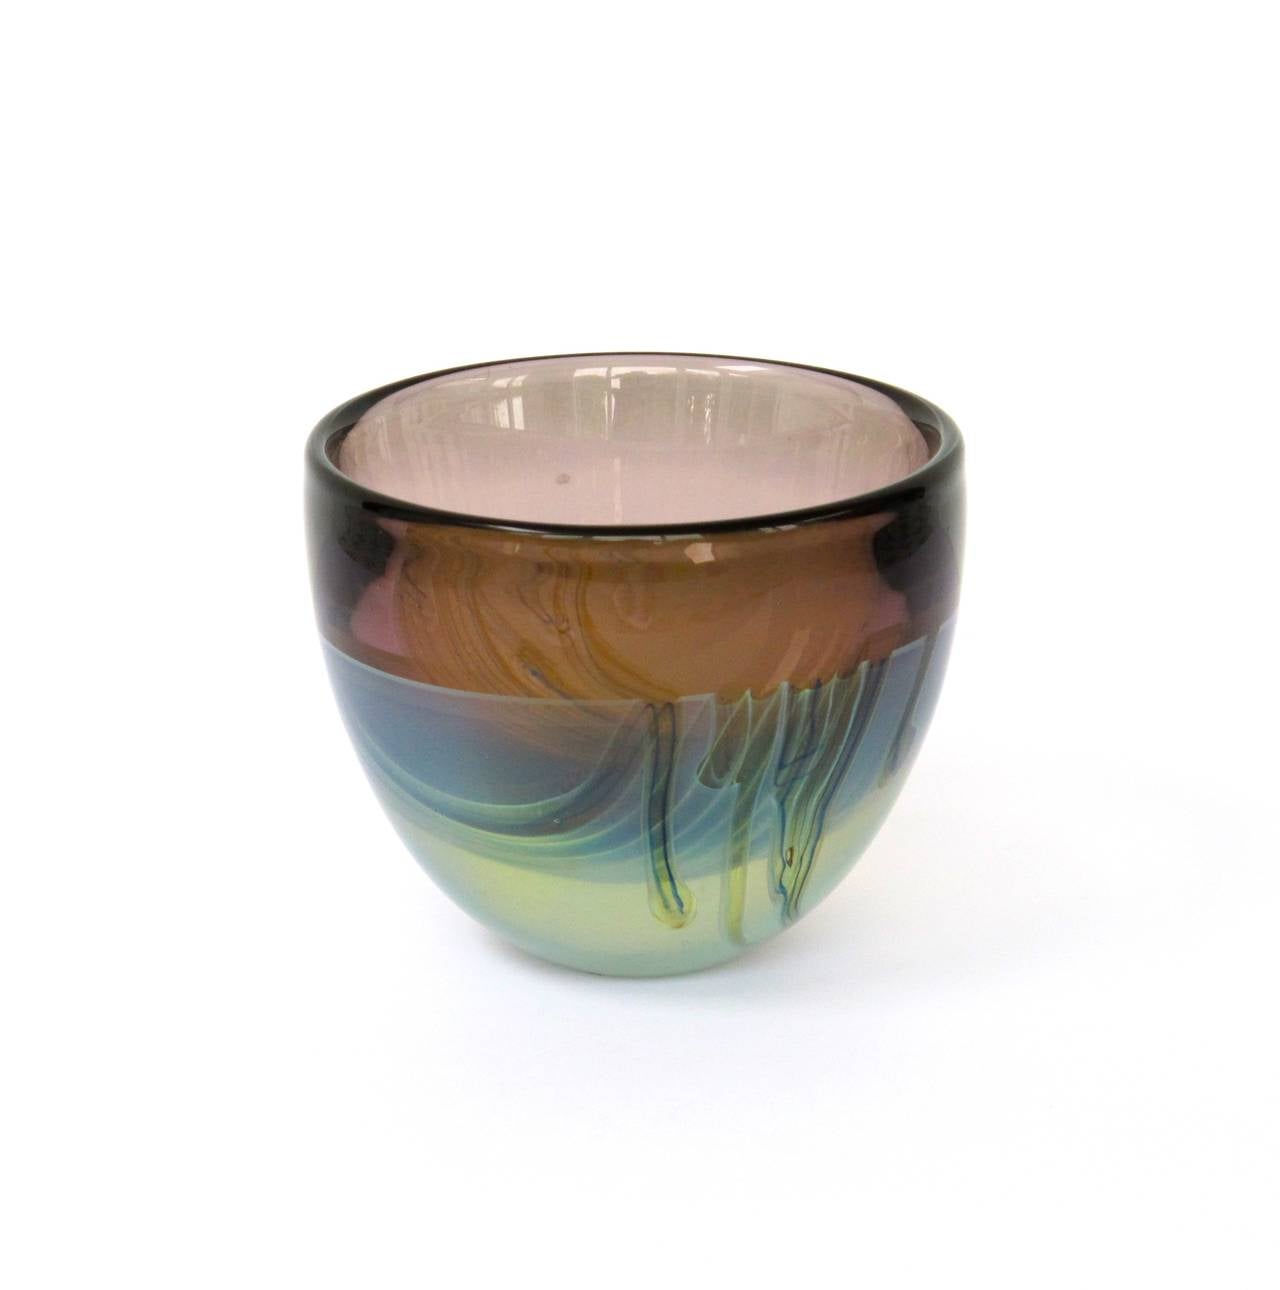 One-off glass bowl 'Waterkant' [waterside] by Dutch glass artist Willem Heesen. This fascinating multi-layered studio glass object was made at Heesen's glass studio De Oude Horn in july 1984. It has a diamond-incised signature on the bottom reading